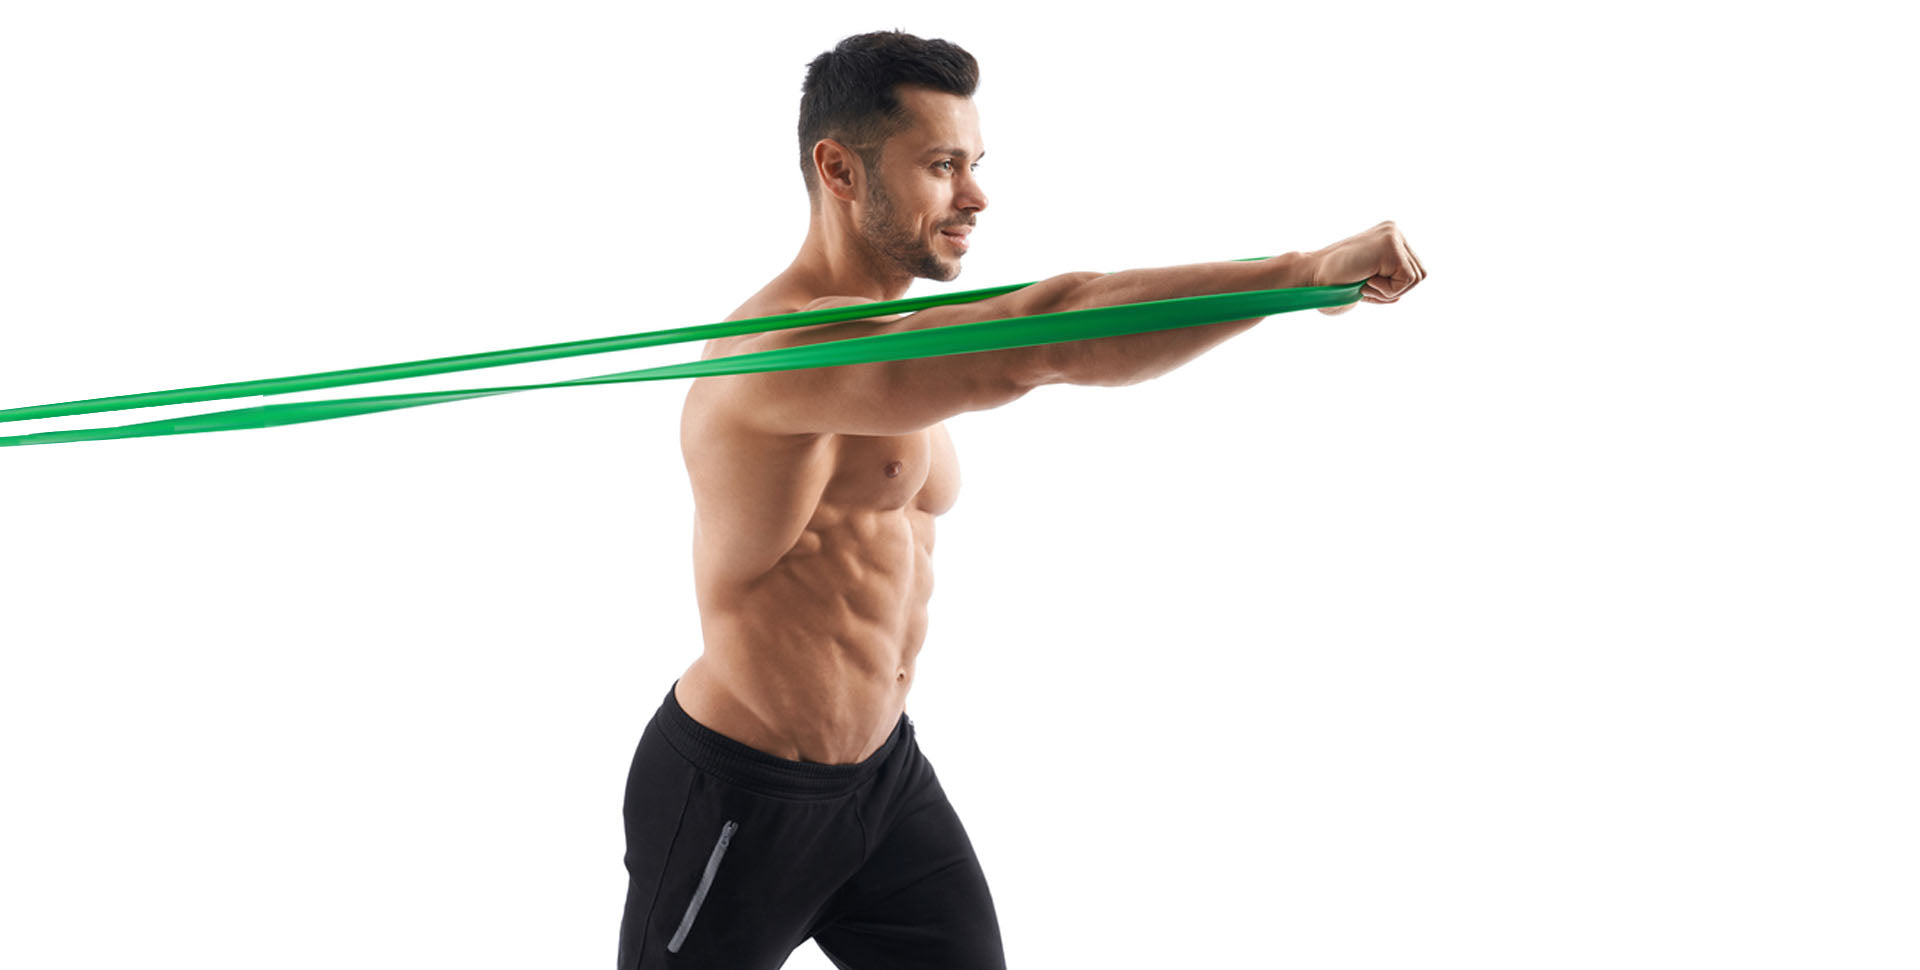 Chest Workout at Home: Best Resistance Band Exercises for Chest